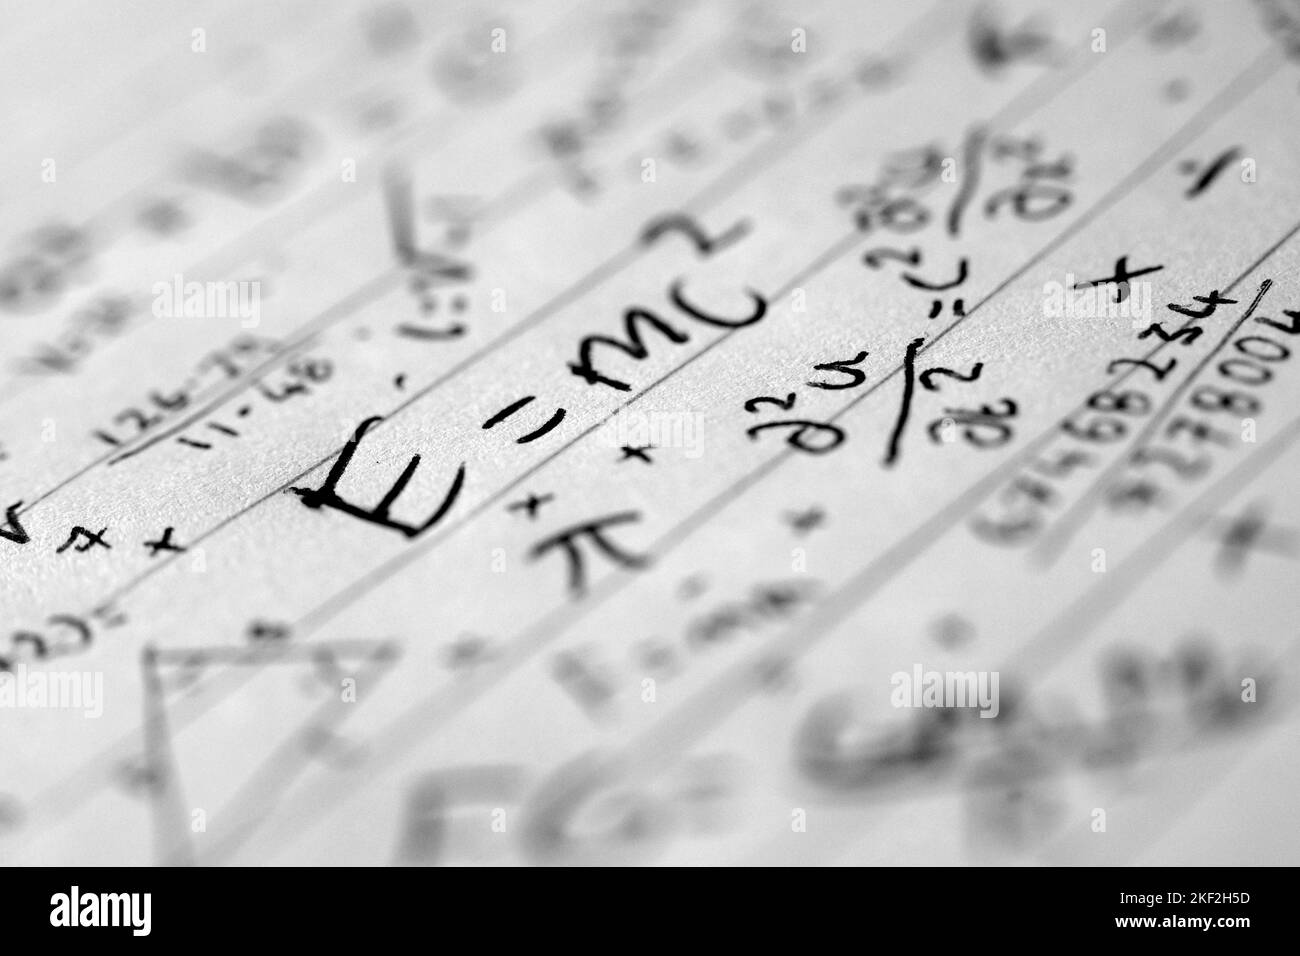 Jumbled, chaotic macro image of hand written equations and calculations on lined paper. Maths anxiety. Mathematical. Math anxiety. Numerical anxiety. Stock Photo